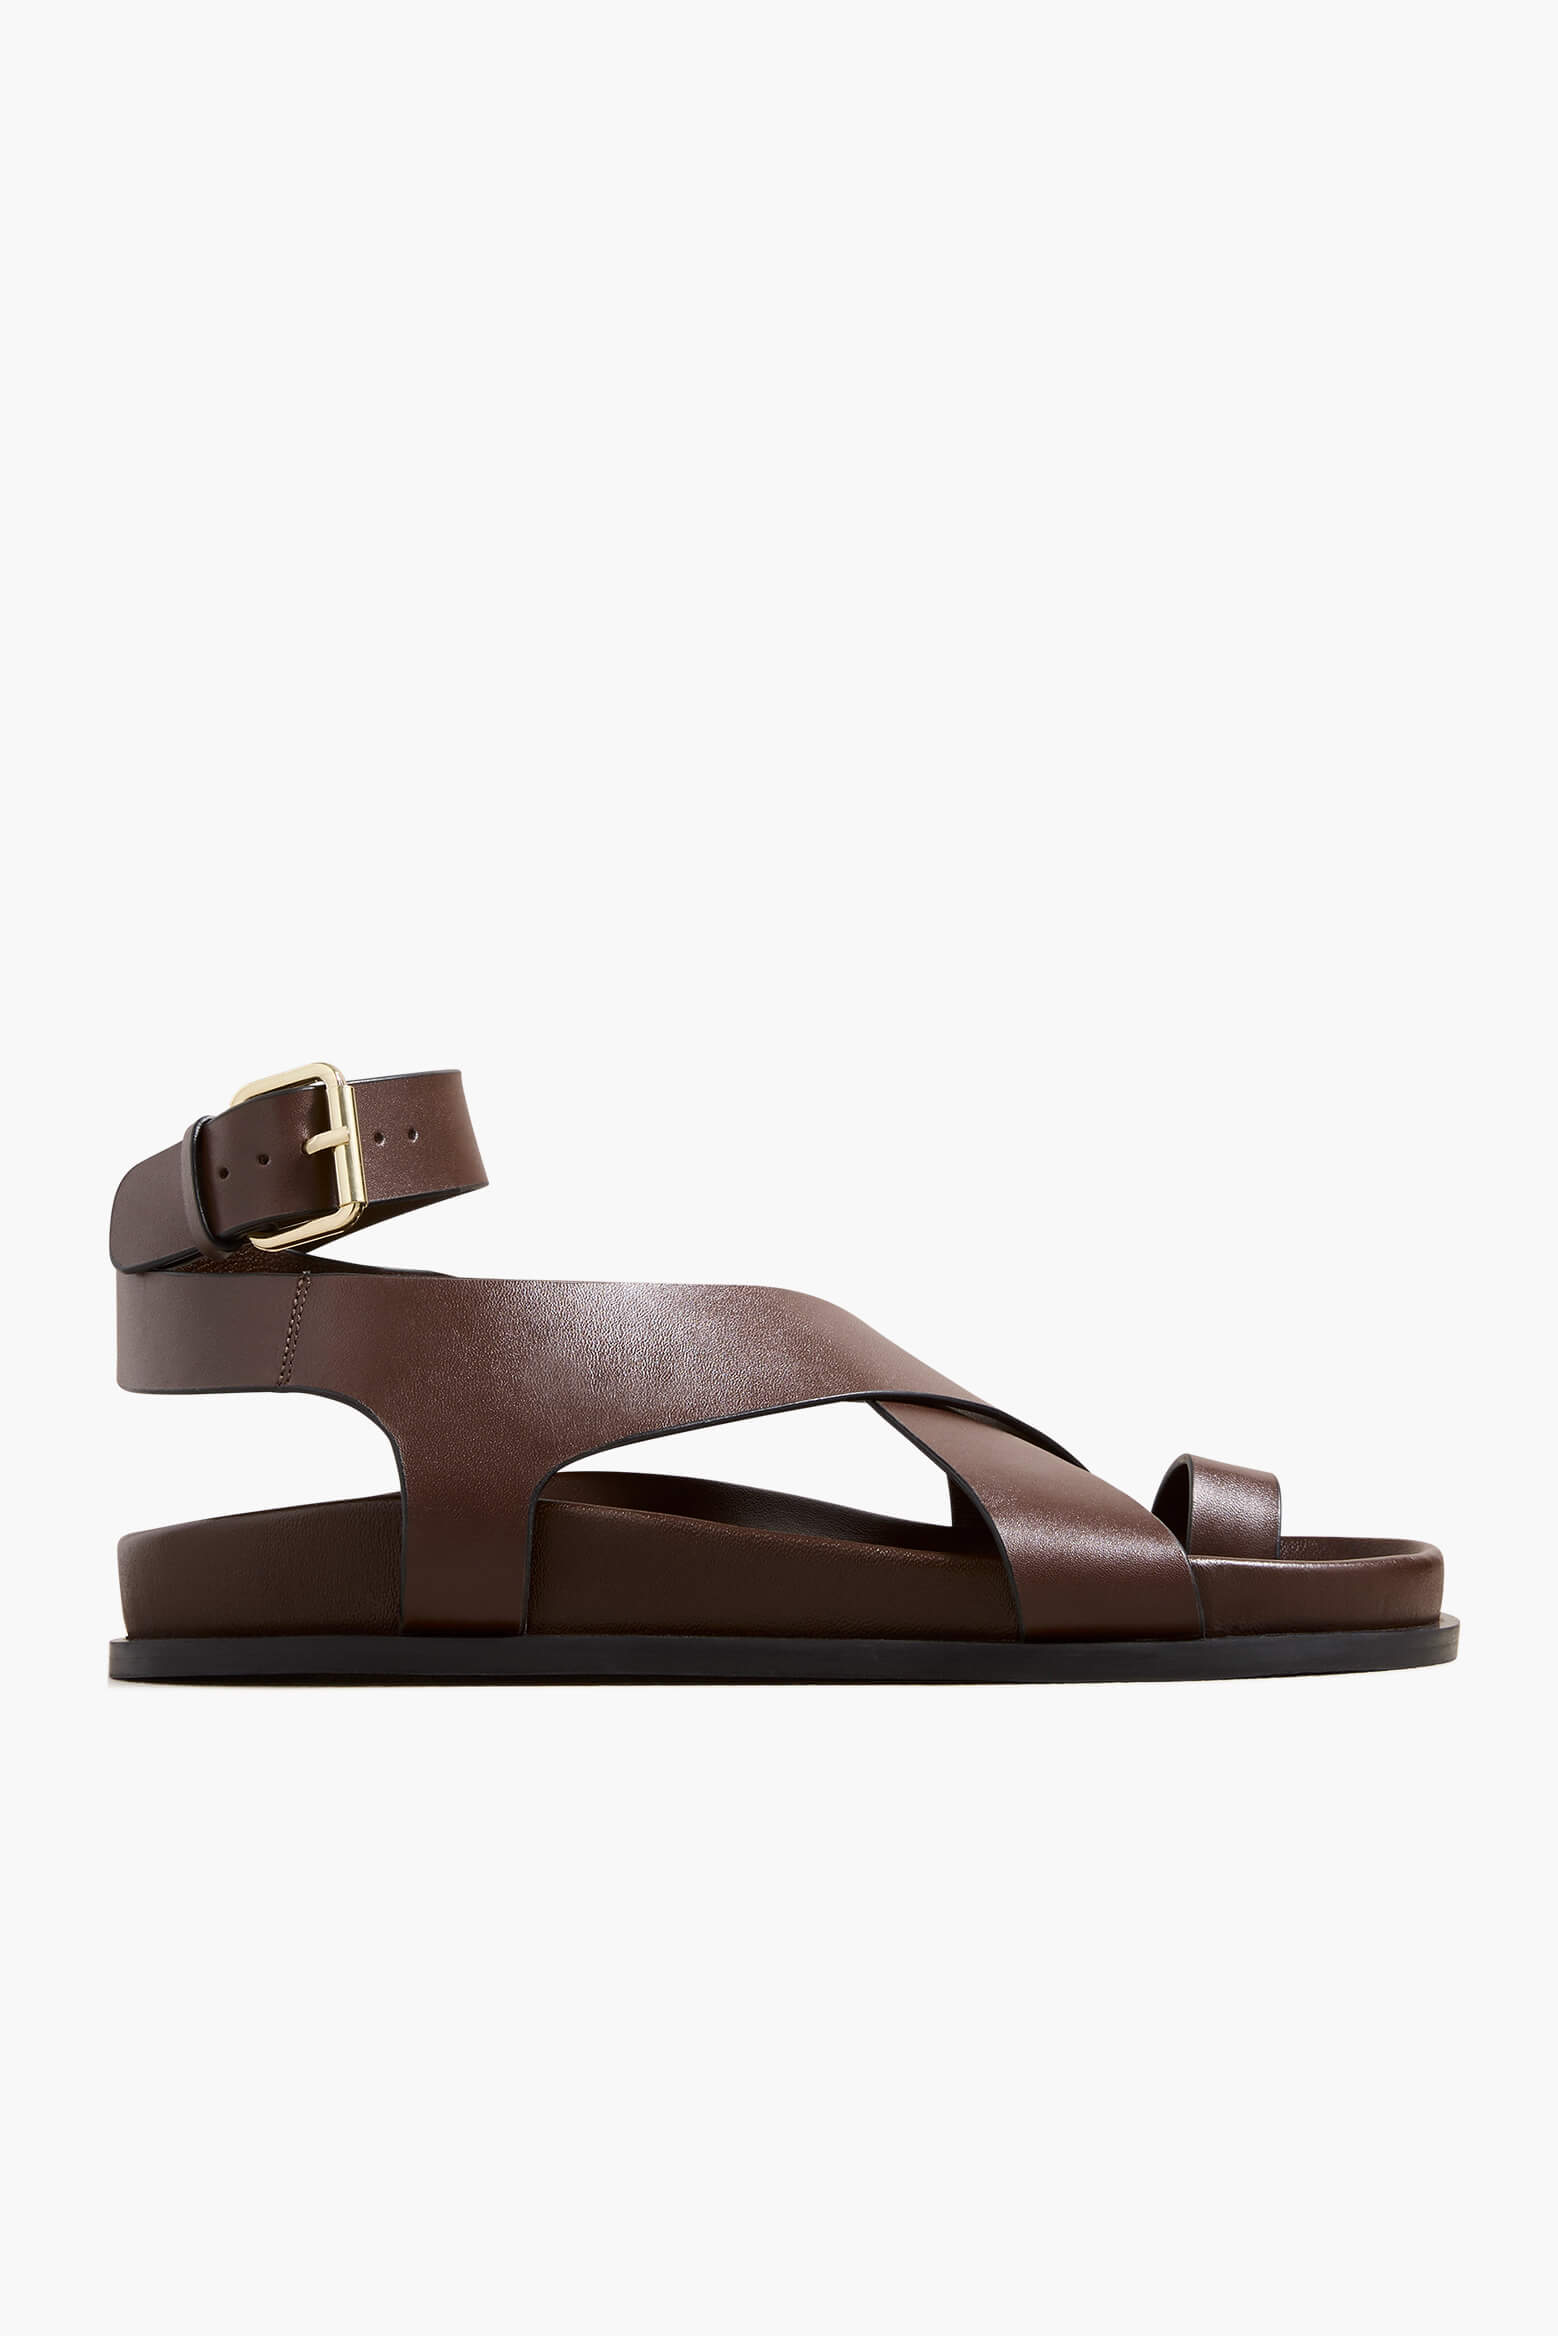 A.Emery Jalen Sandal in Walnut available at The New Trend Australia.